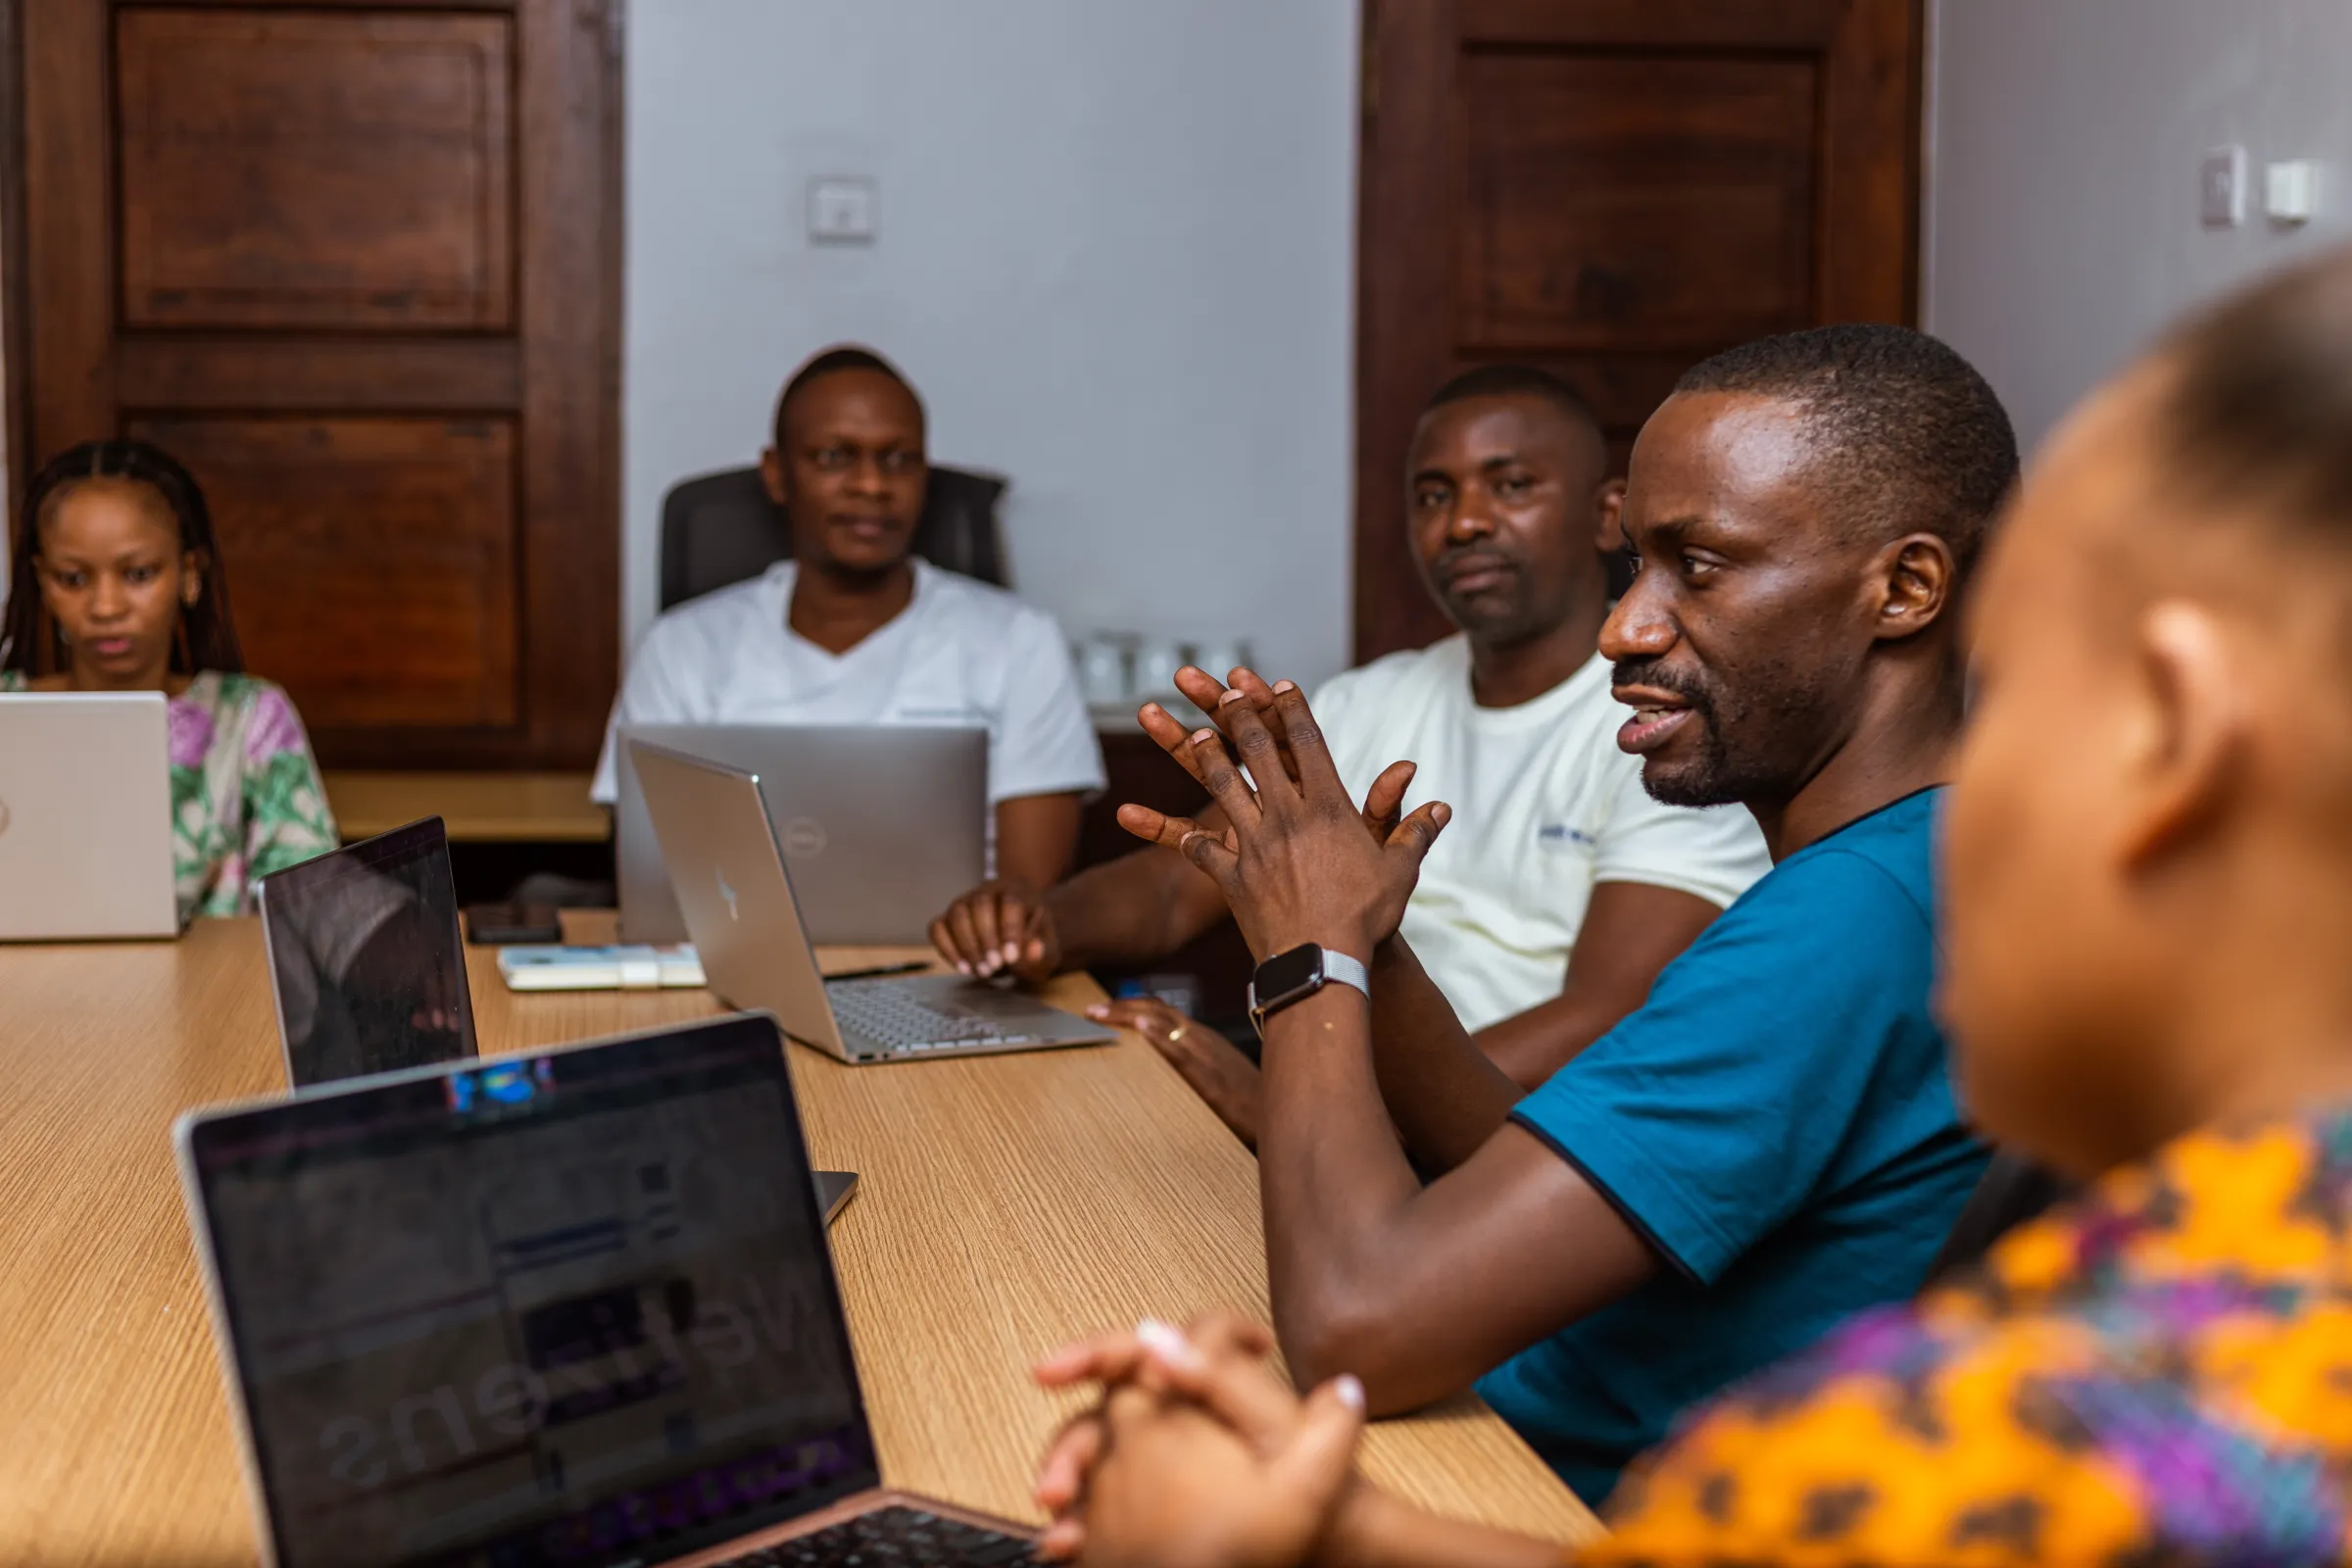 Maxence Melo, founder of JamiiForums, talks to his colleagues during a meeting at their office in Dar es Salaam, Tanzania. May 27, 2022. Thomson Reuters Foundation/ Yohana Haule